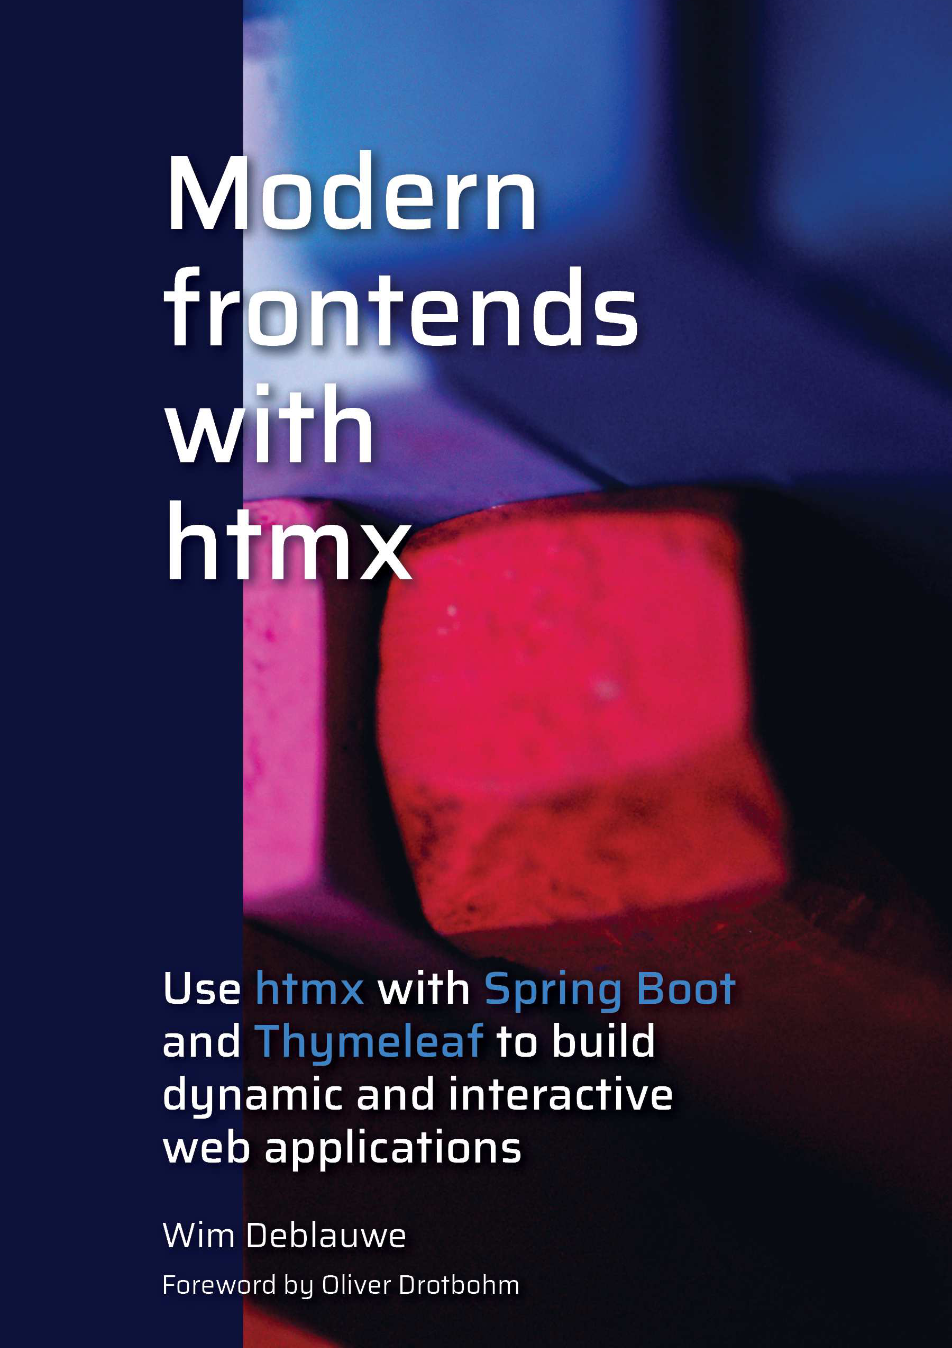 modern frontends cover